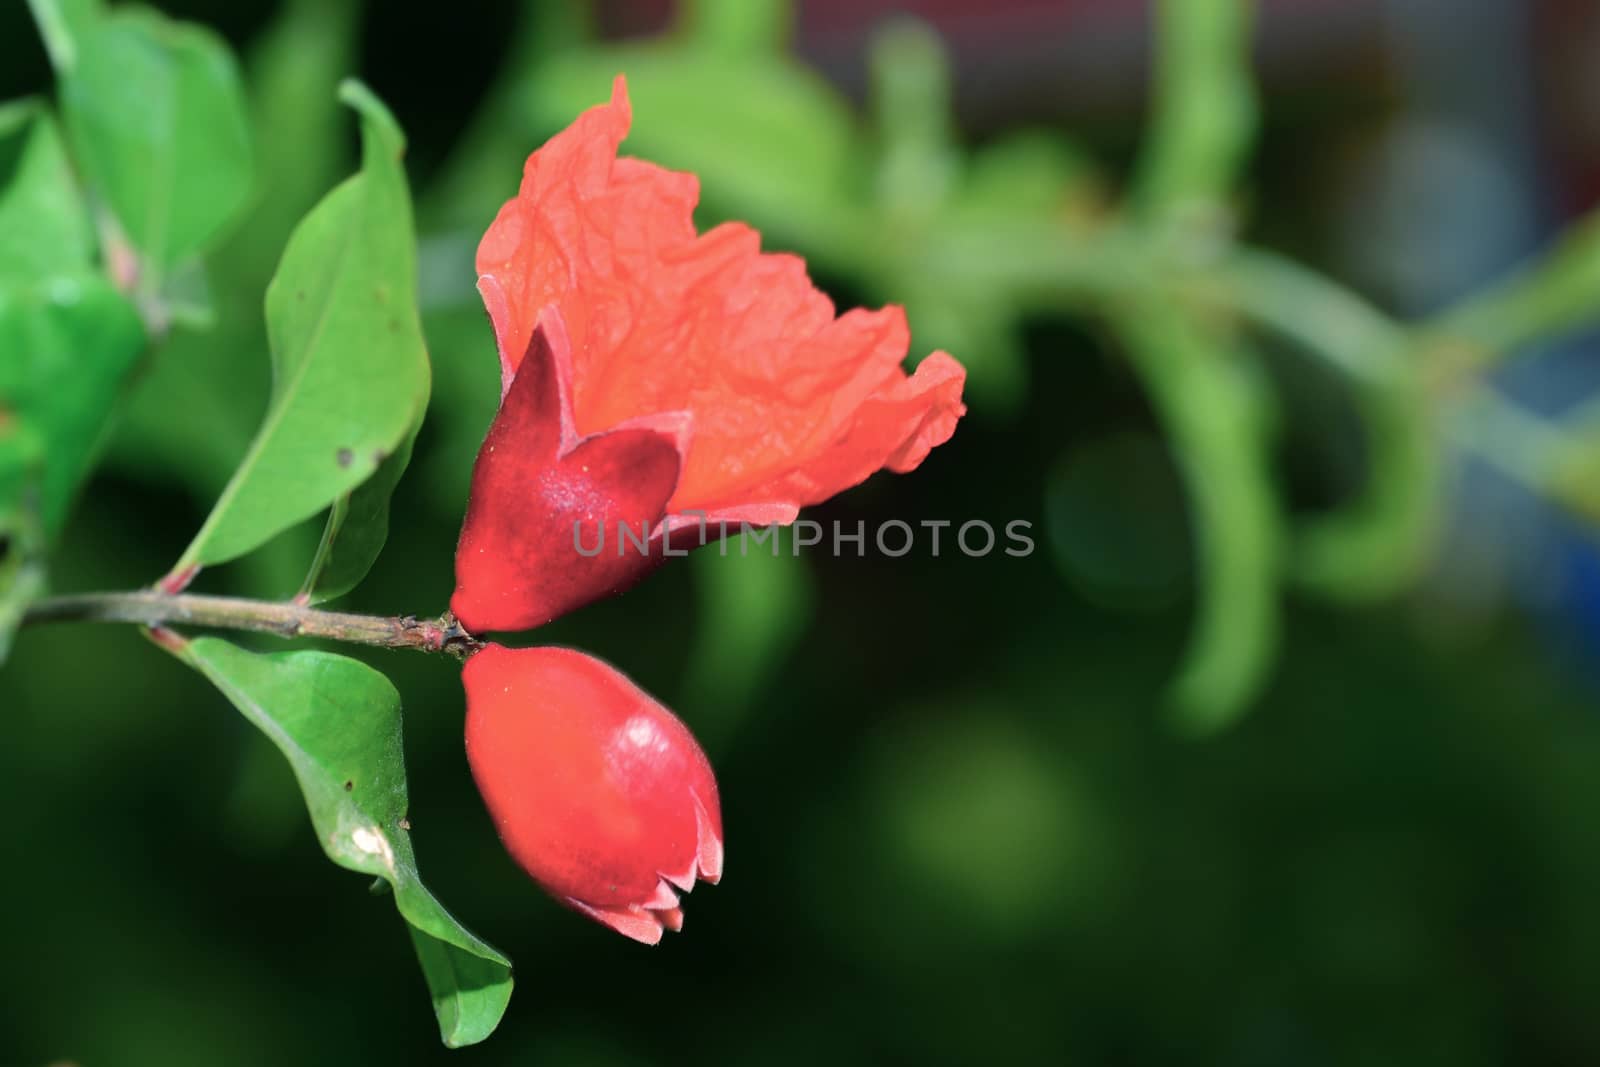 Pomegranate flowers or Punica granatum flowers by ideation90